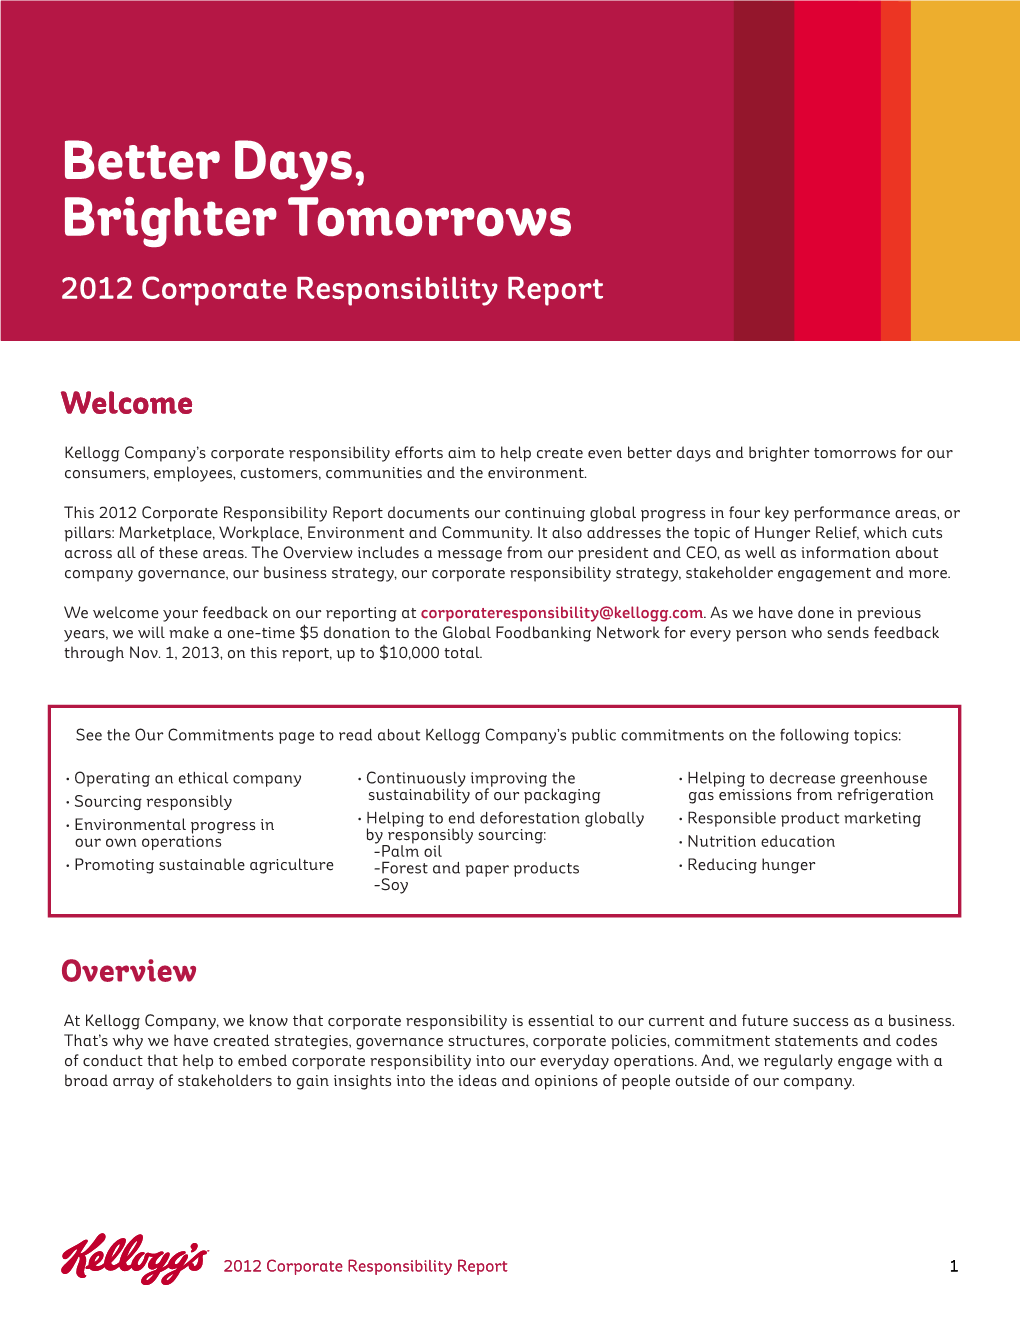 Better Days, Brighter Tomorrows 2012 Corporate Responsibility Report